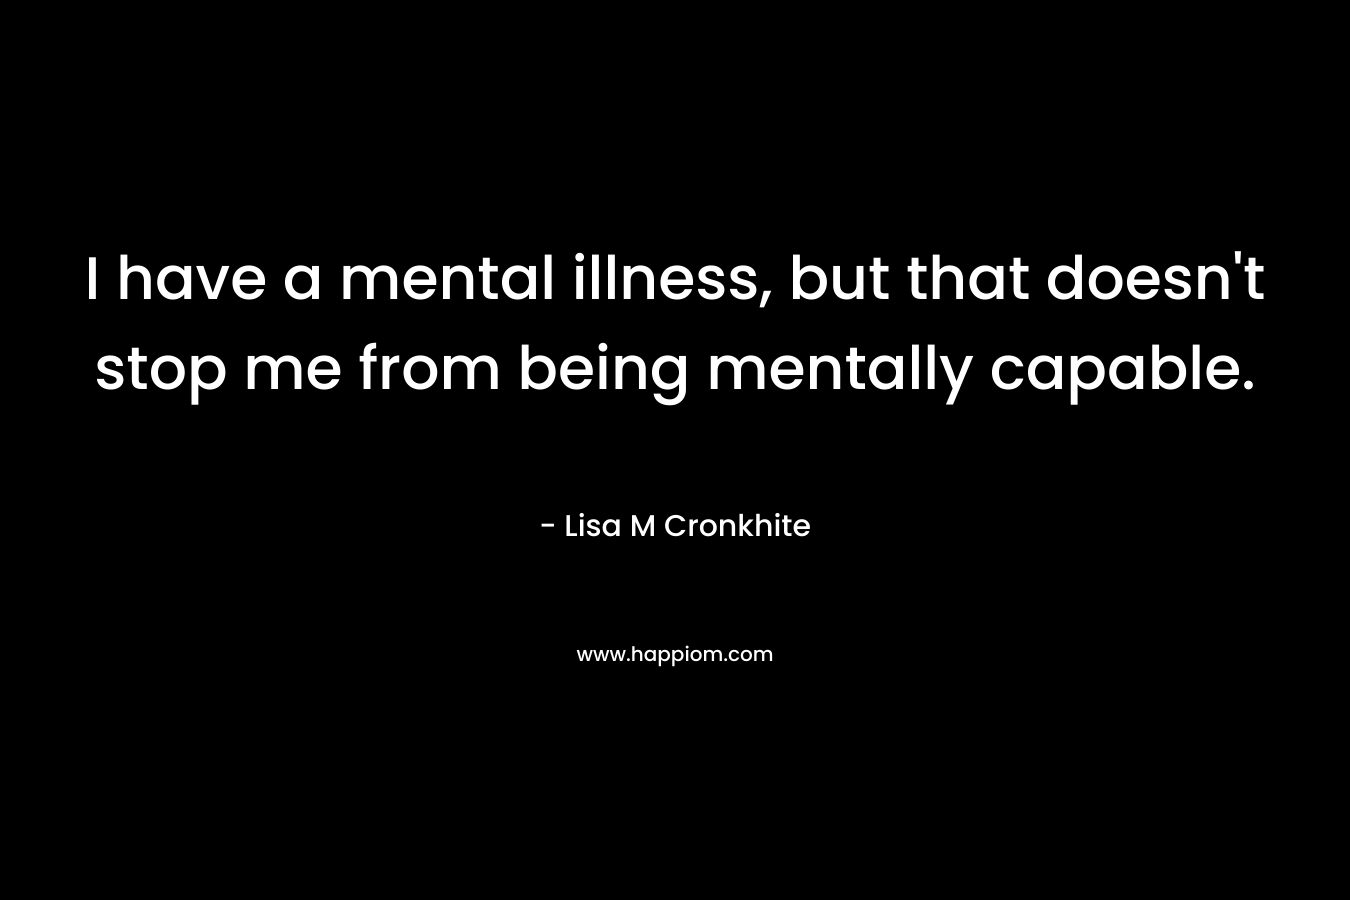 I have a mental illness, but that doesn’t stop me from being mentally capable. – Lisa M Cronkhite